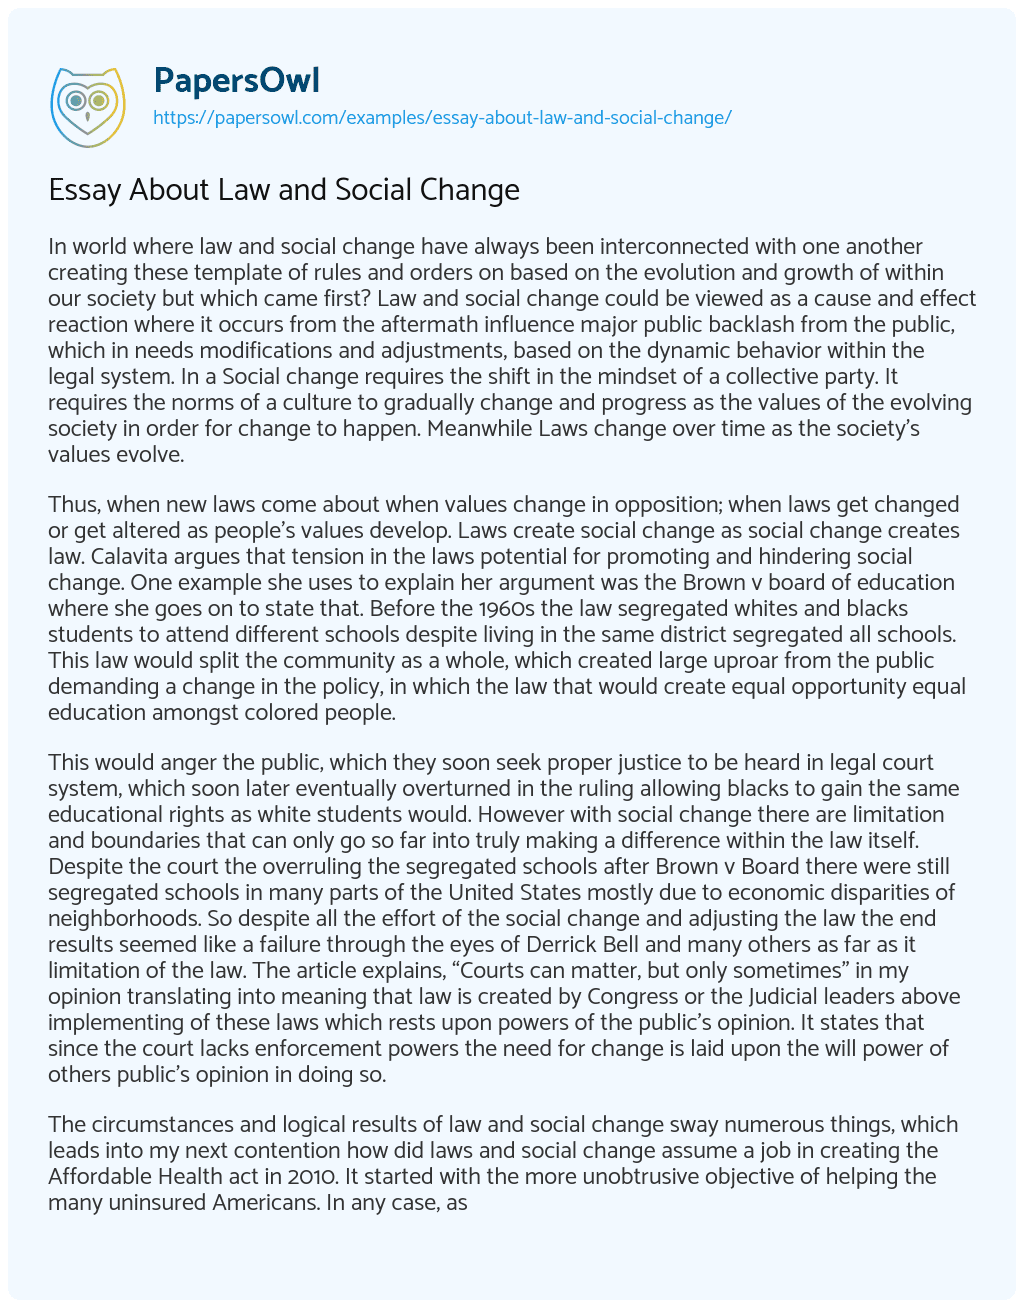 Essay on Essay about Law and Social Change